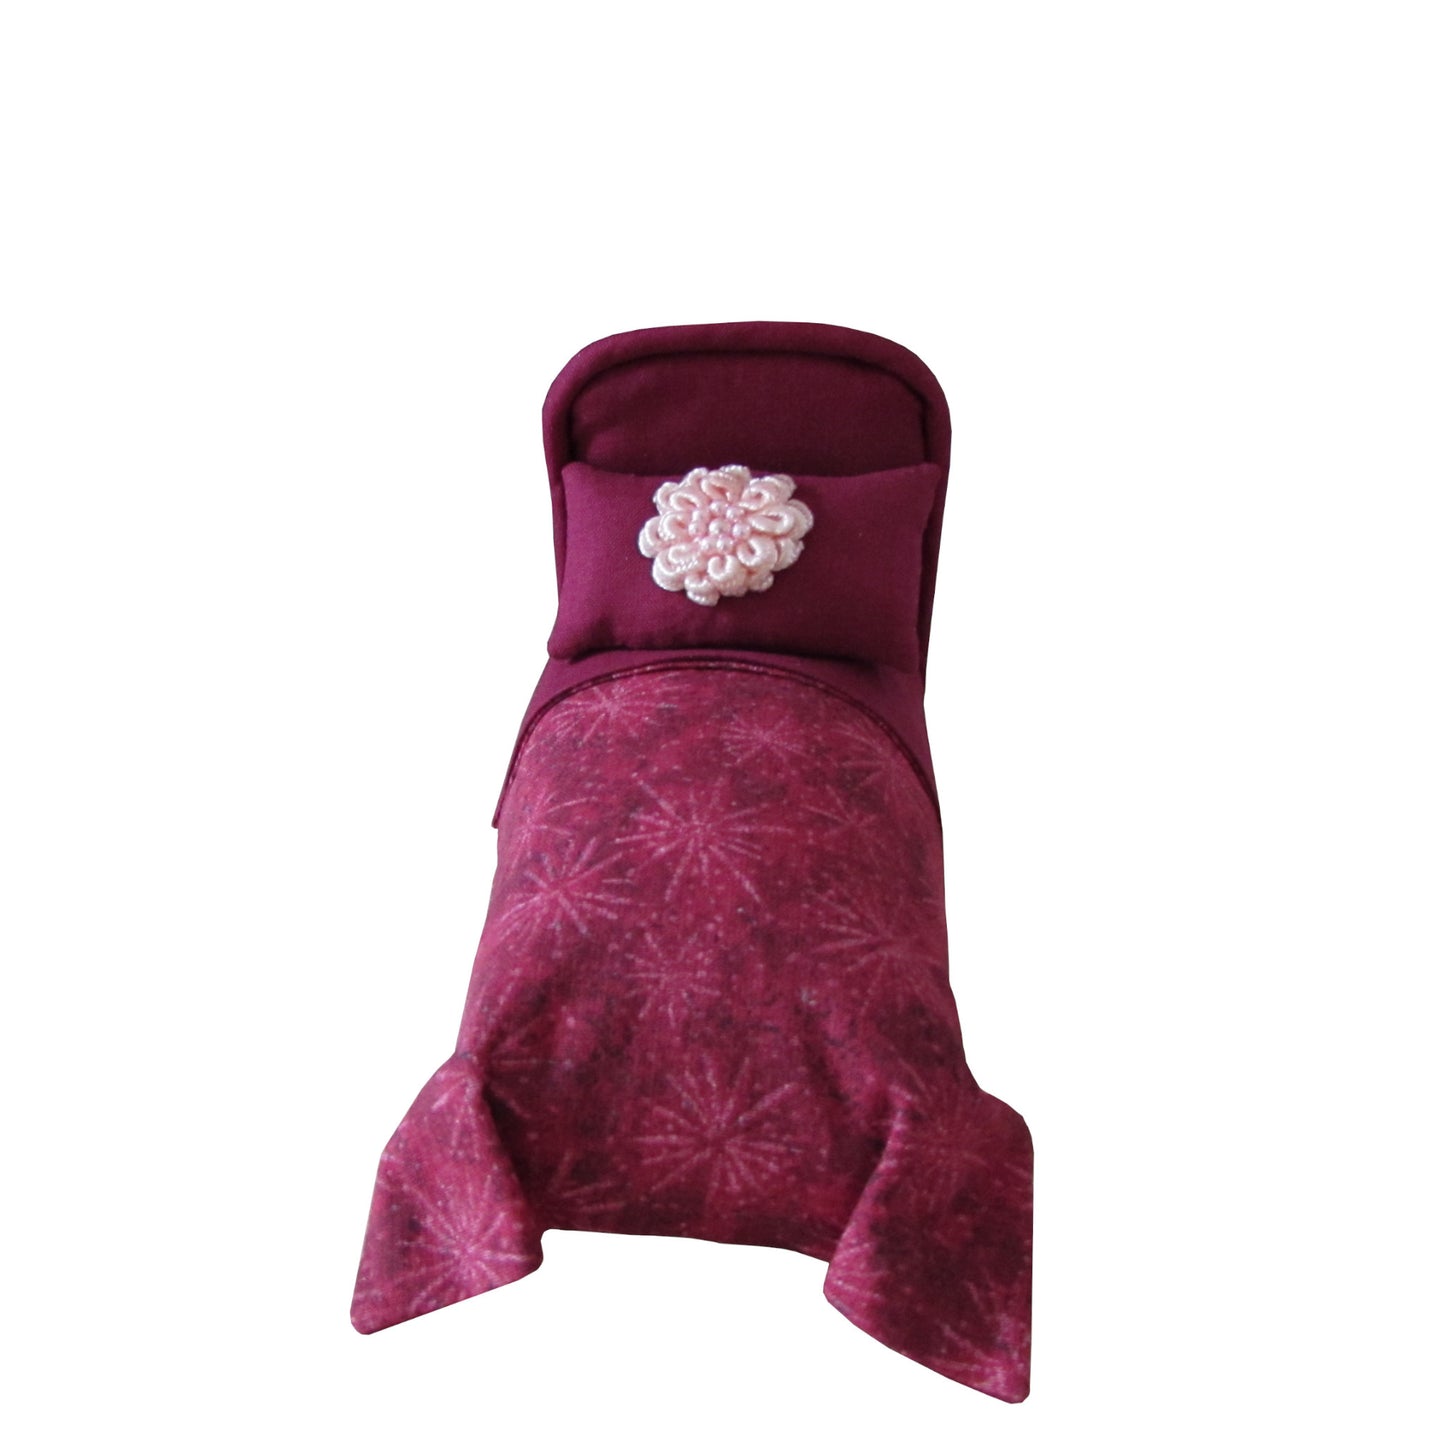 Burgundy Pincushion Bed with Bedding Front view